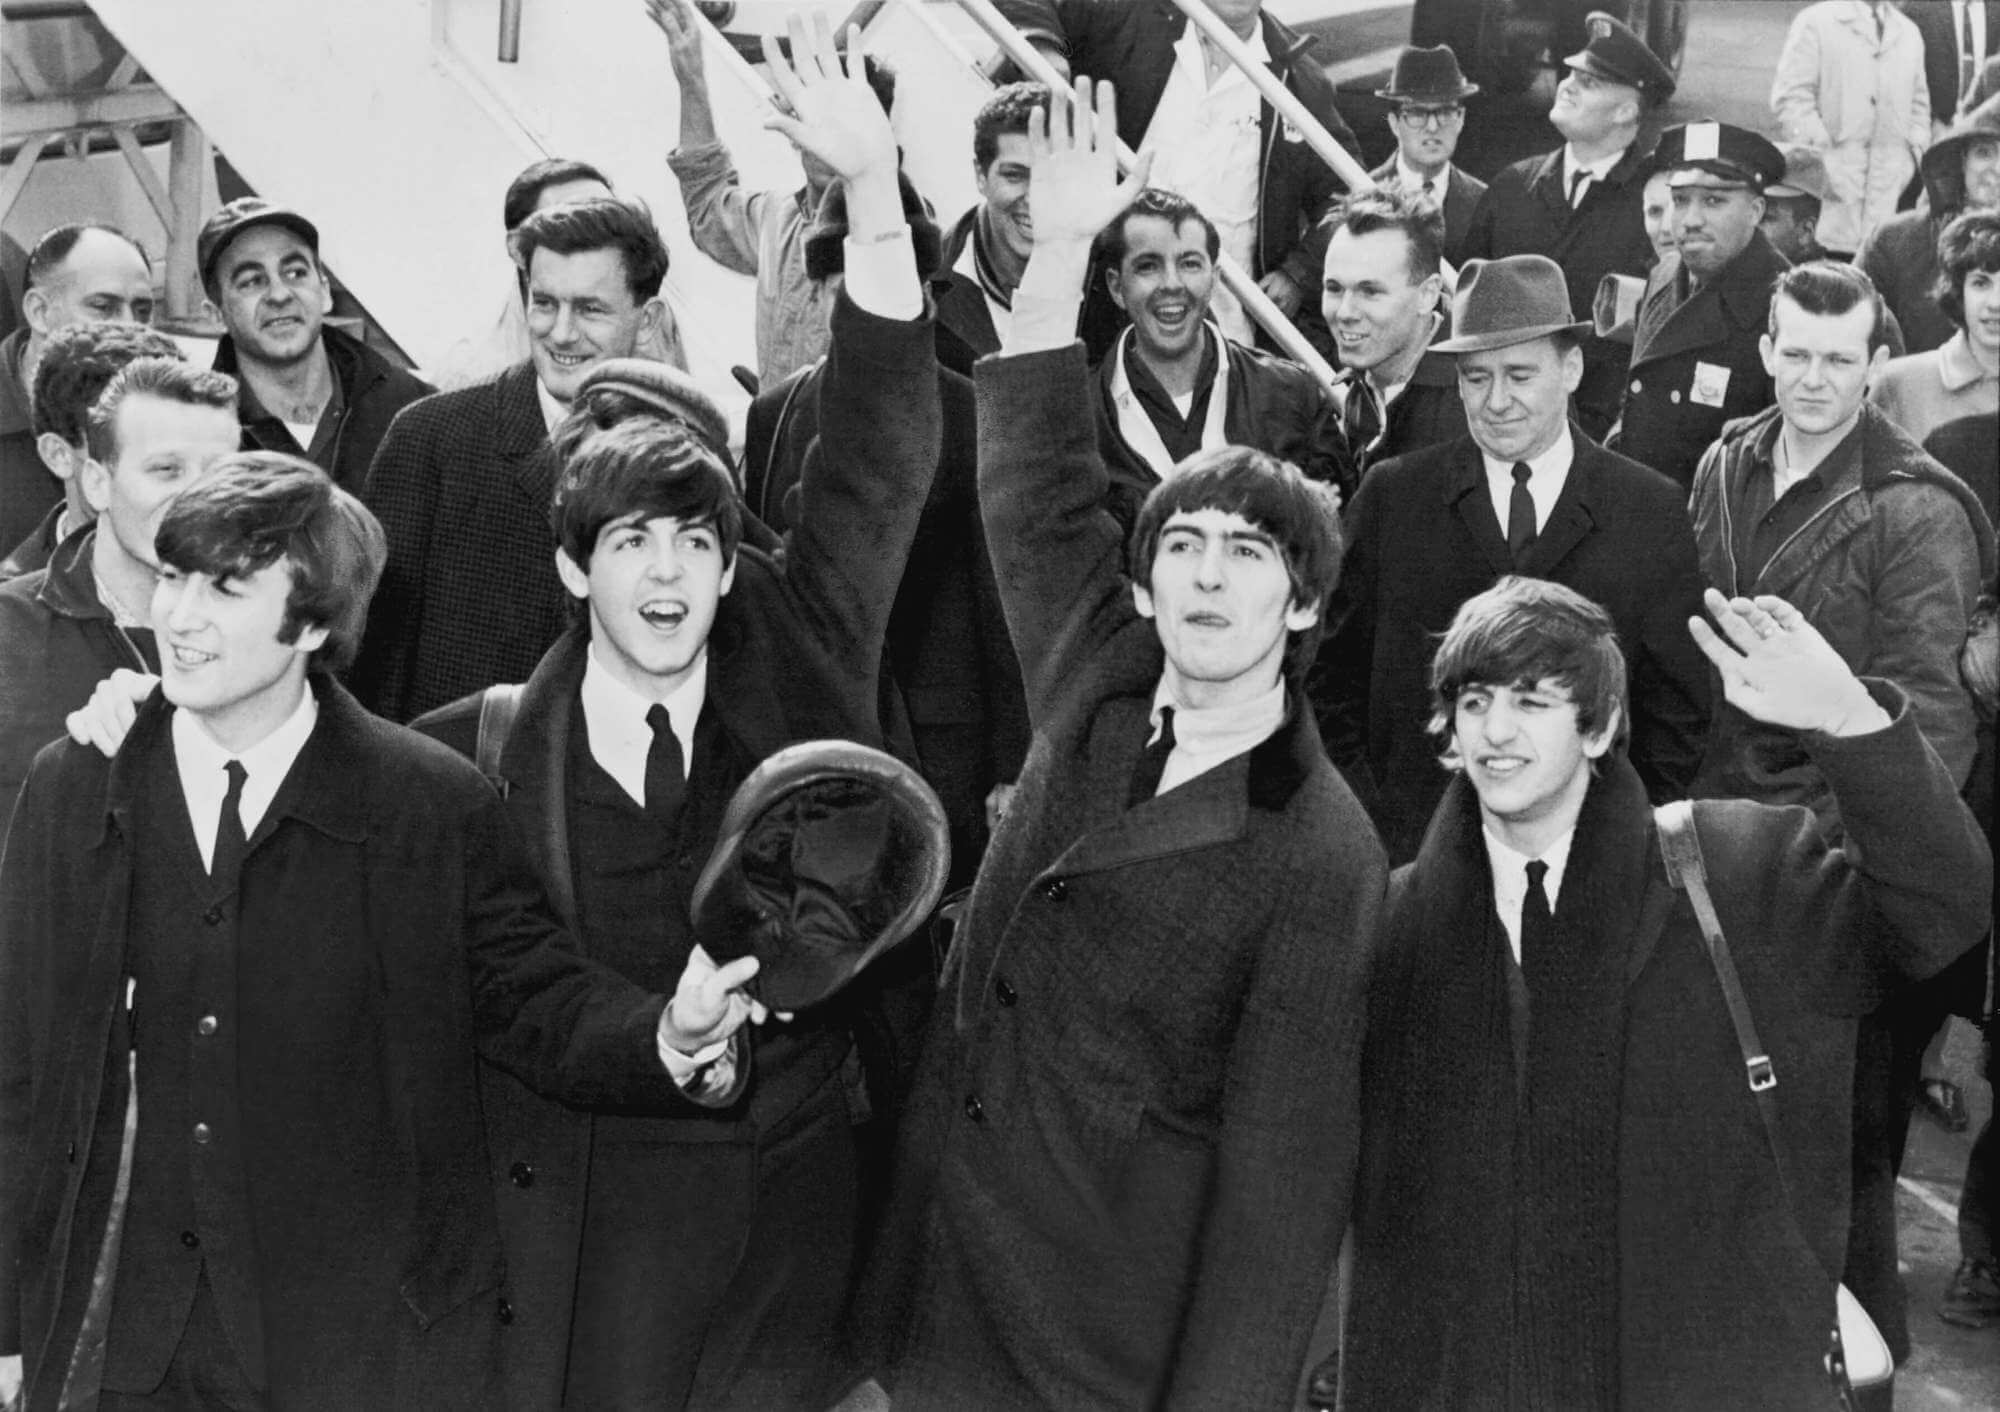 The Beatles waving their hands as police and onlokers smile in the background